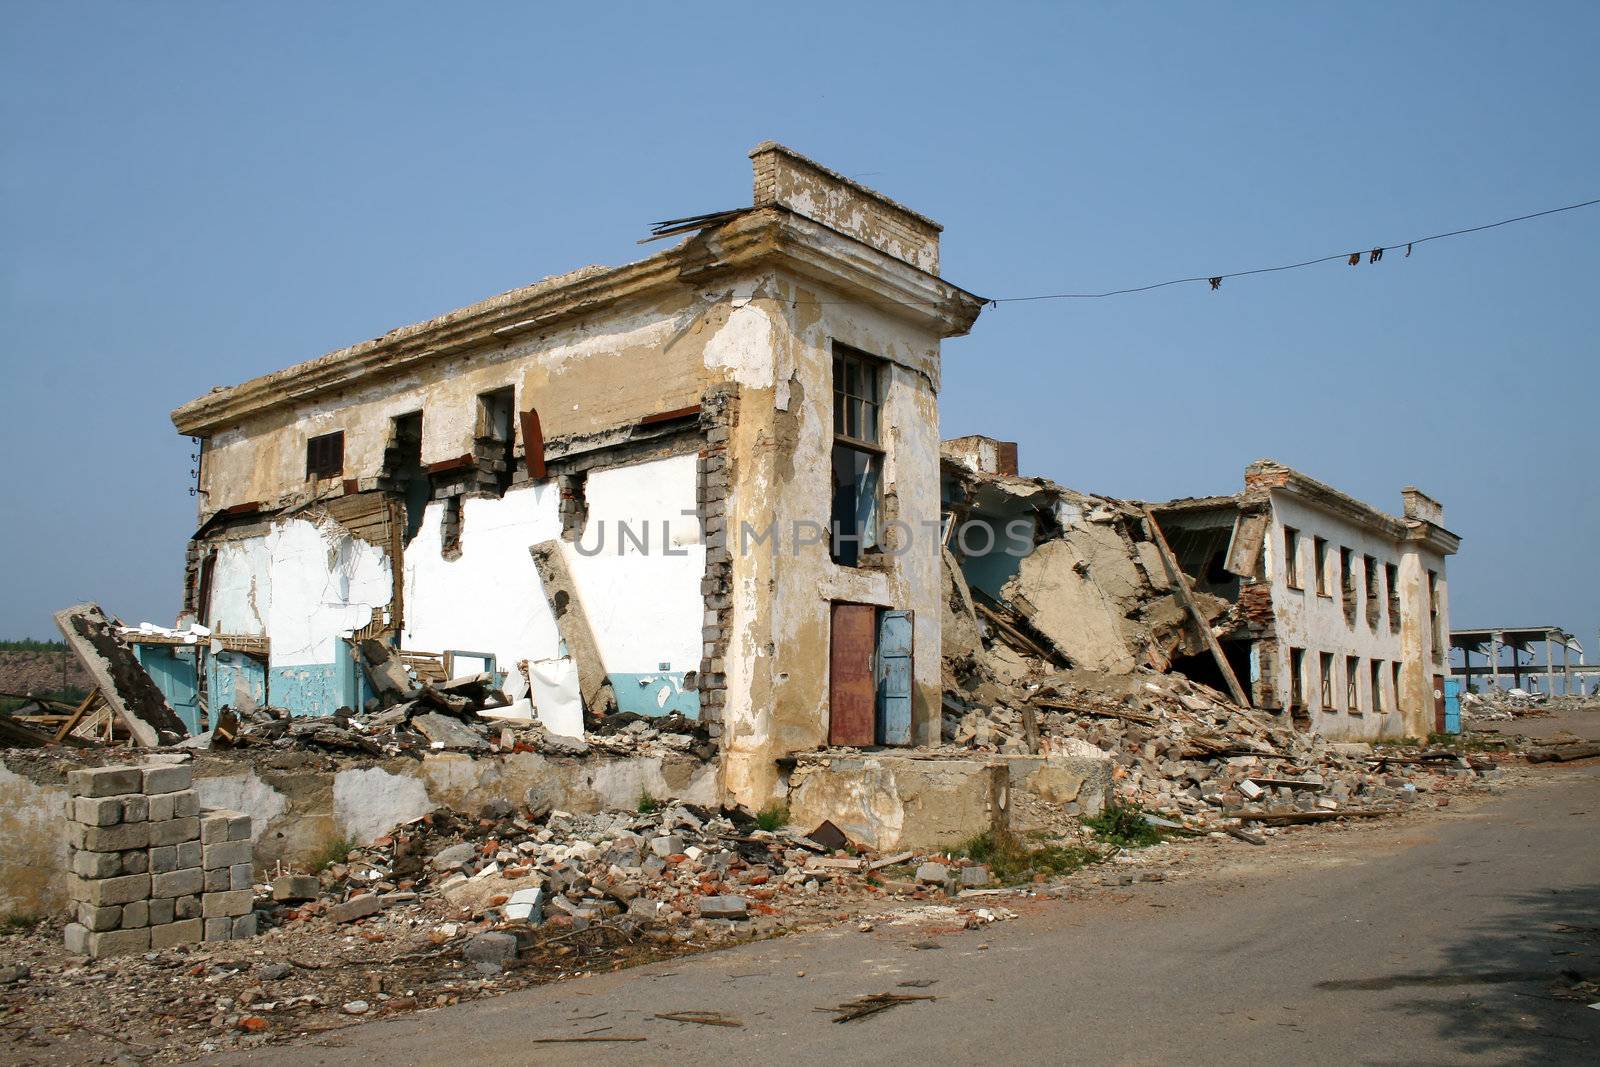 Destroyed building as an aftereffect of earthquake